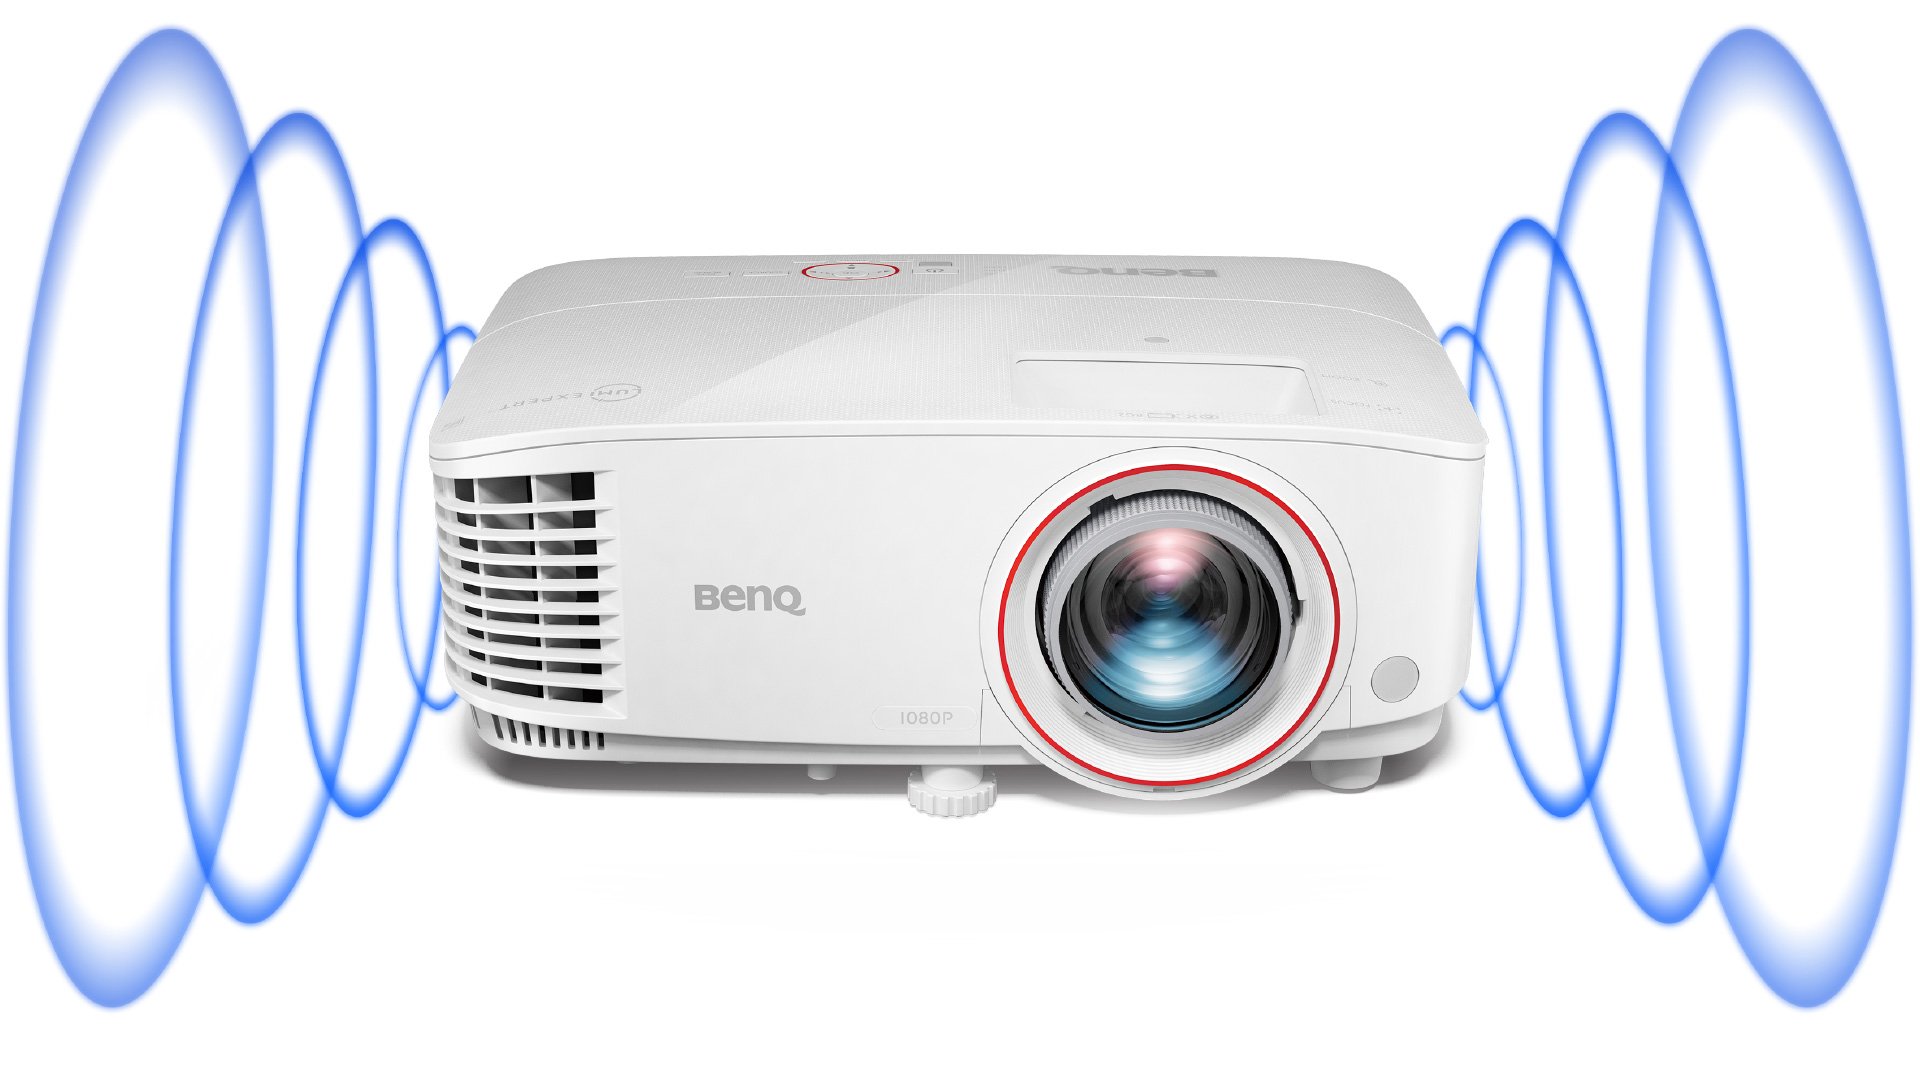 TH671ST | 1080p 3000lm Short Throw Home Theater Projector | BenQ US